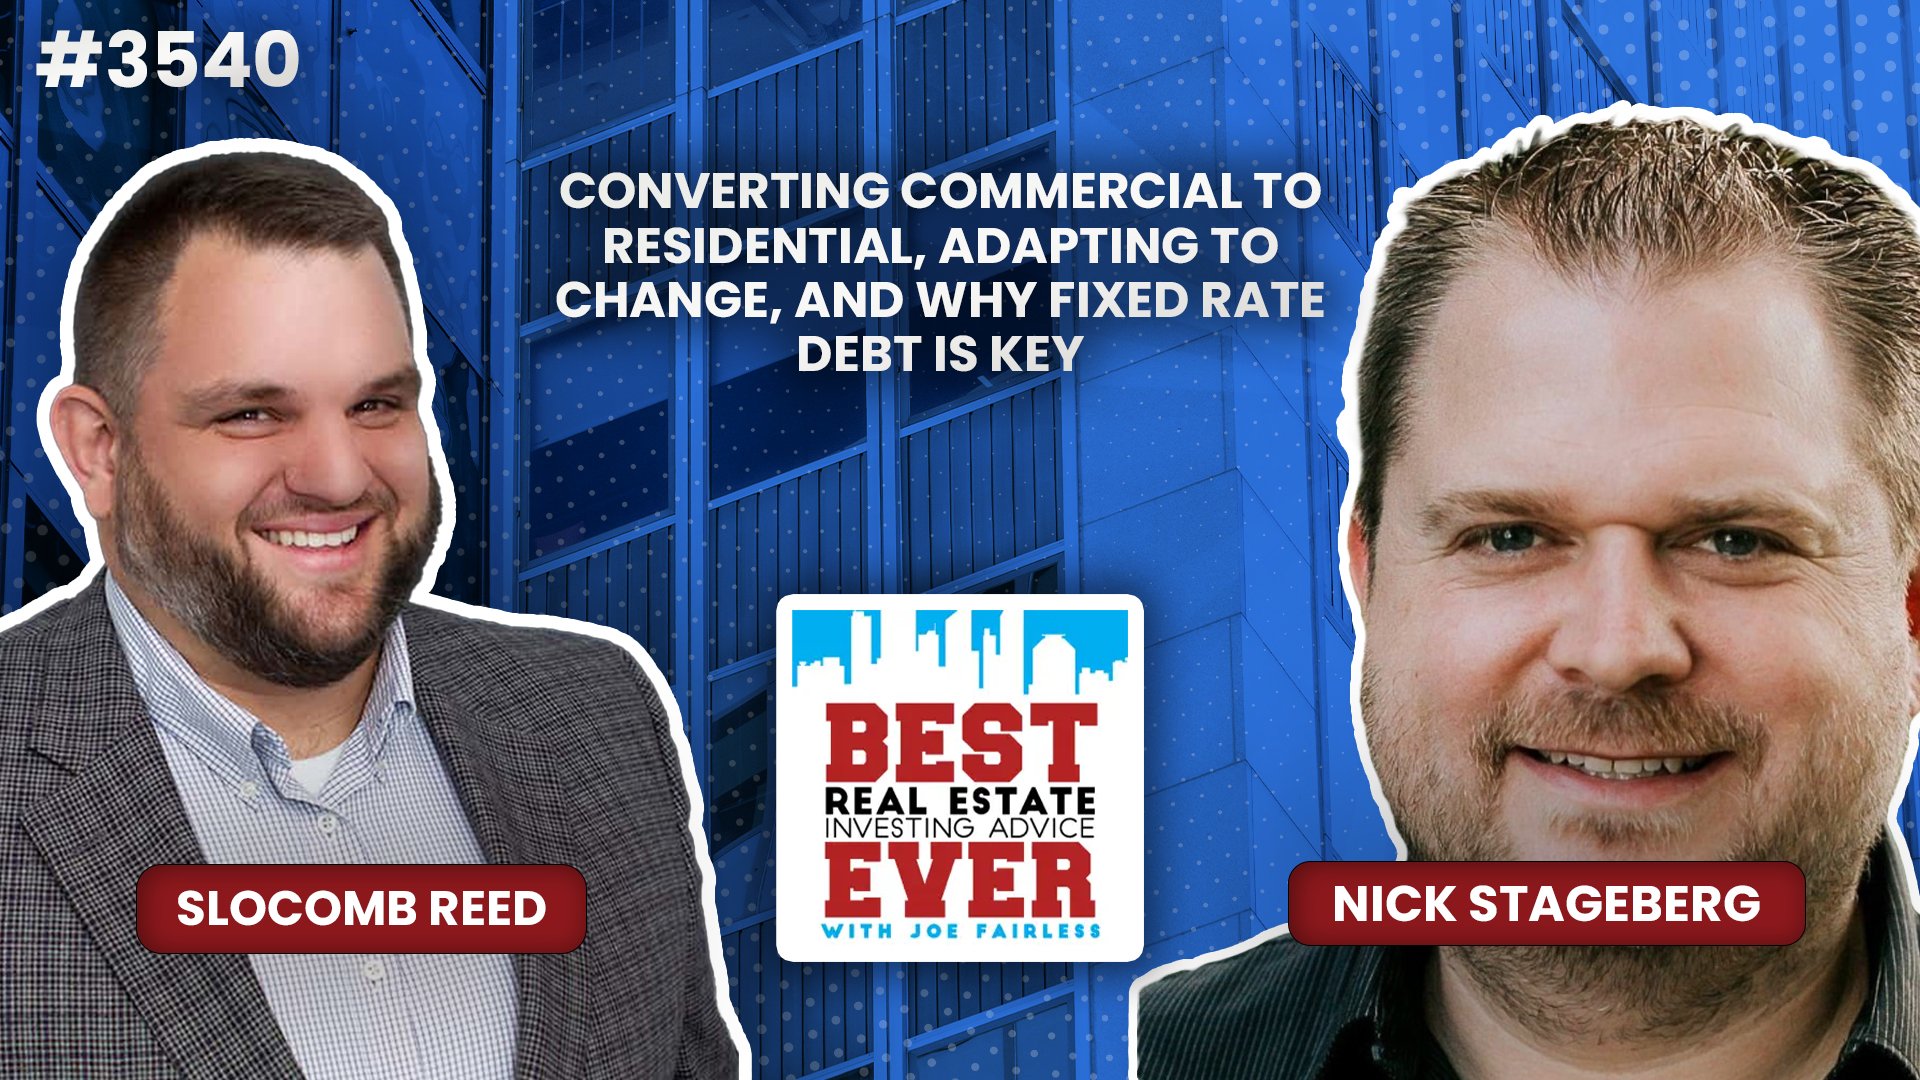 JF3540: Converting Commercial to Residential, Adapting to Change, and Why Fixed Rate Debt is Key ft. Nick Stageberg